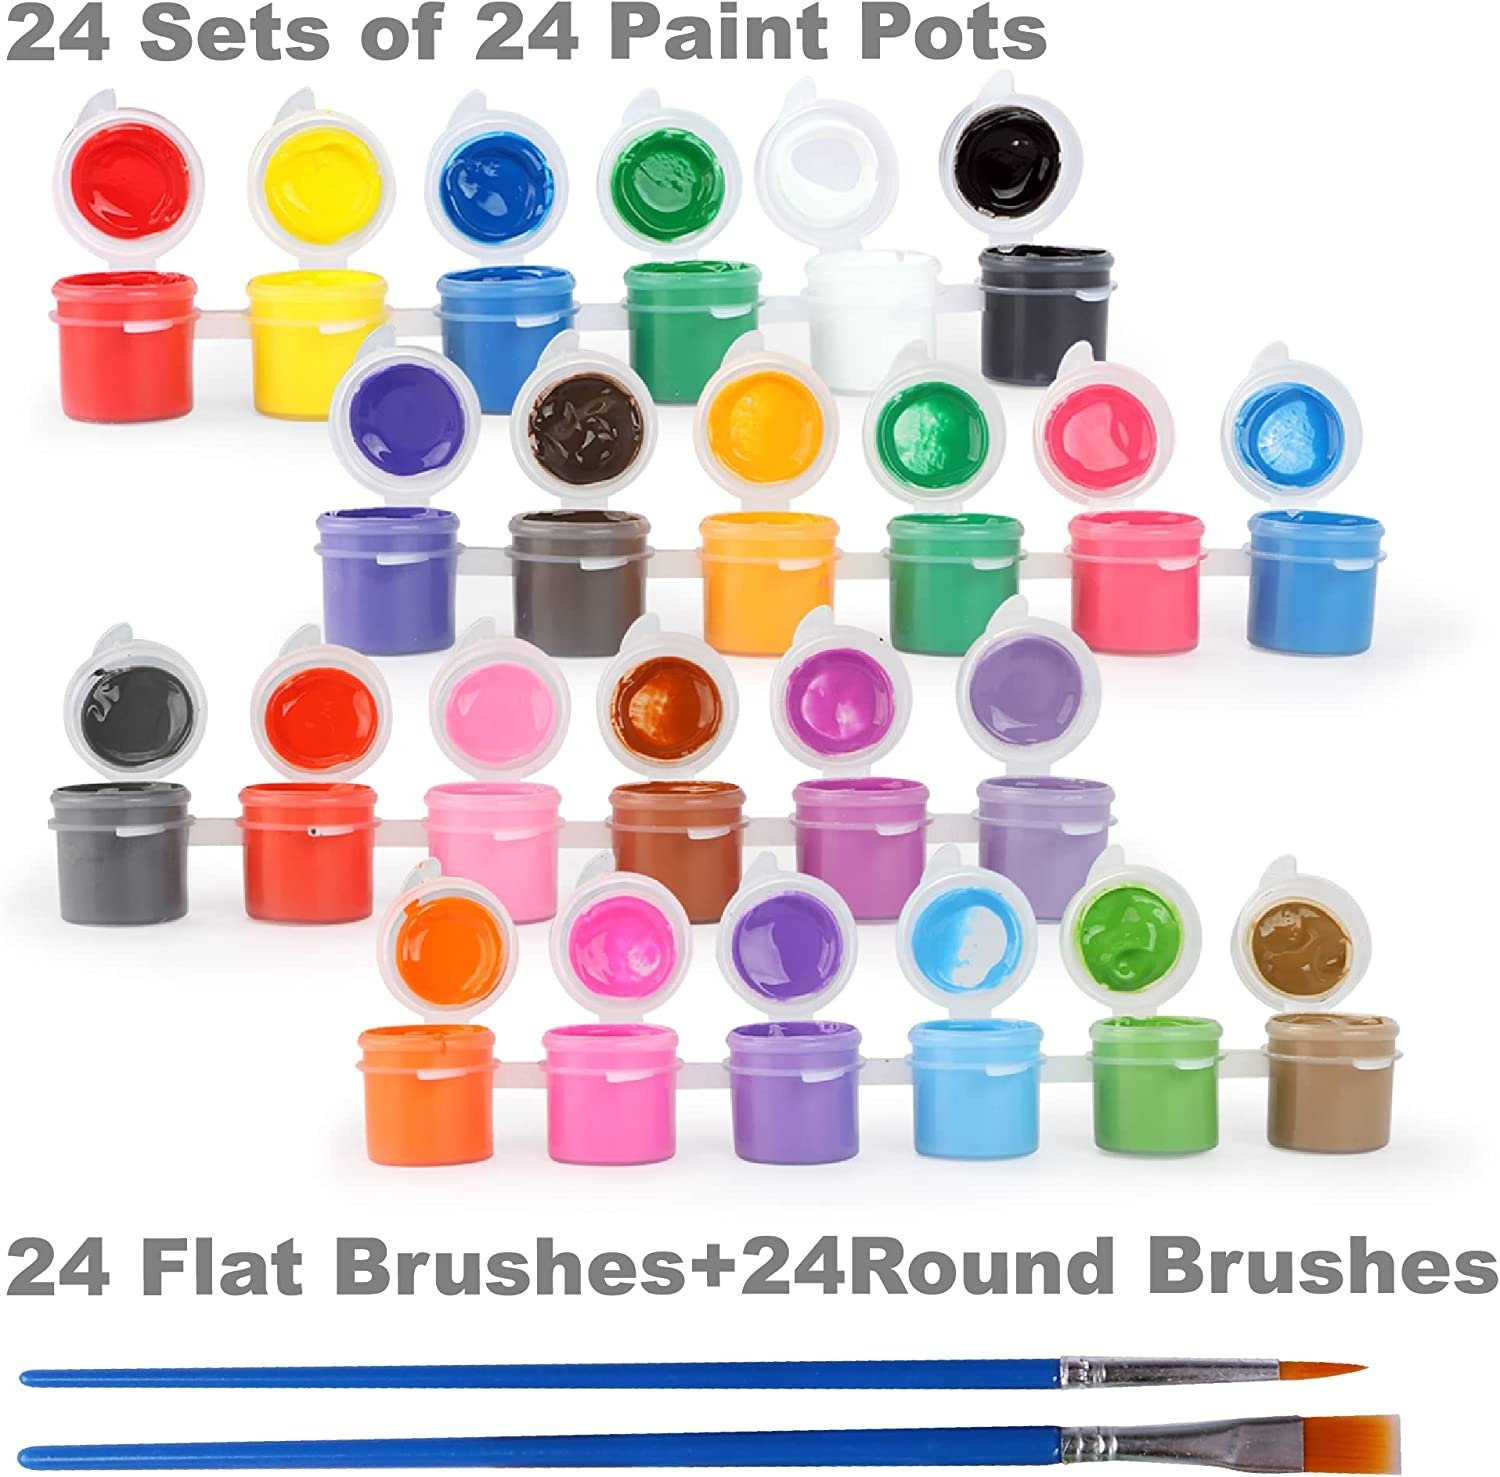 Koltose by Mash Bulk Acrylic Paint Sets for Kids, 24 Individual Sets of 12 Colored Paints A Glitter Paint and 2 Brushes, for Schools Clubs